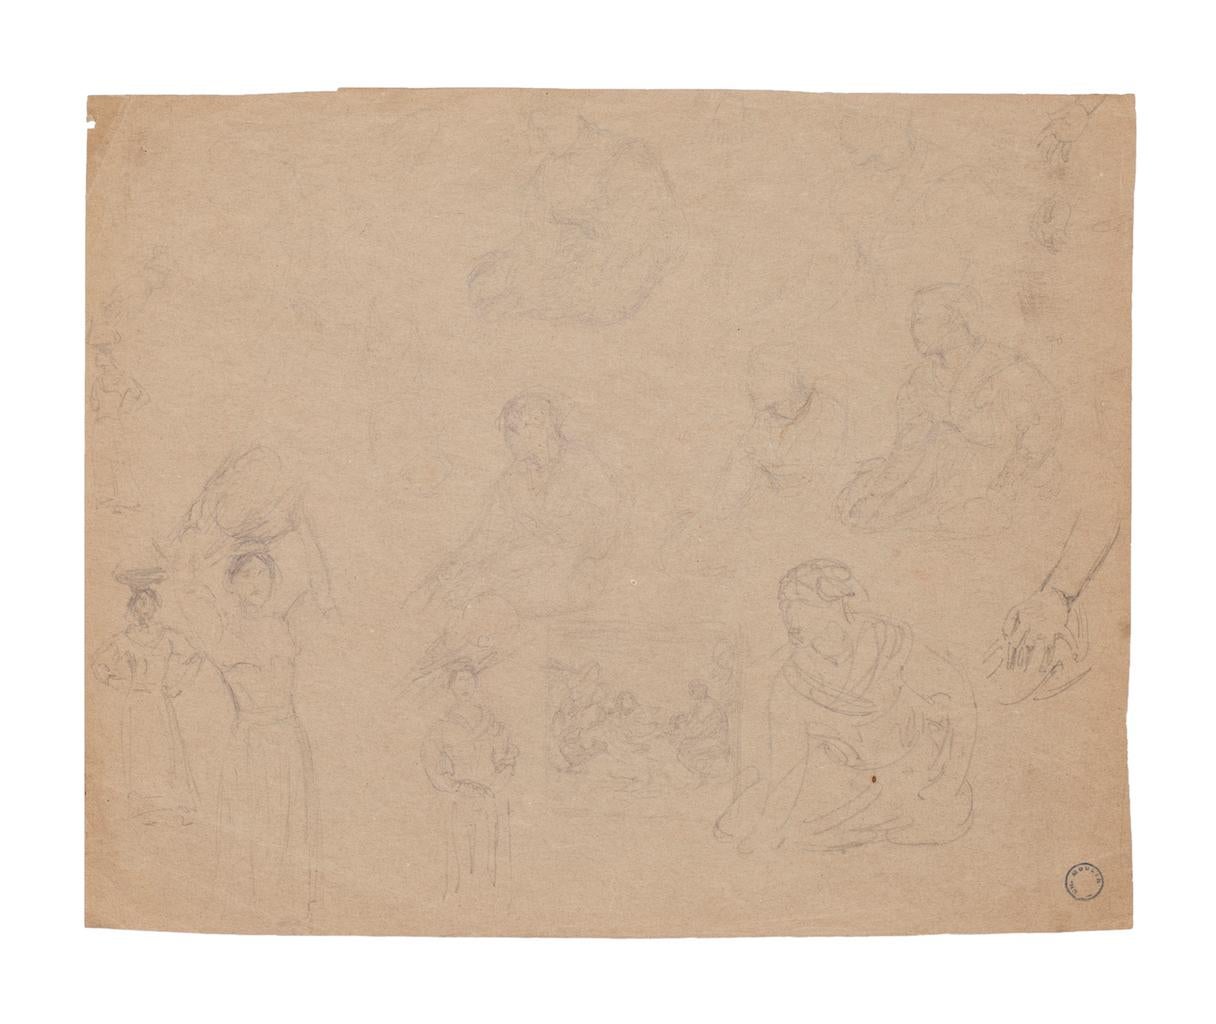 Unknown Figurative Art - Figures - Pencil on Brownish Paper - 20th Century